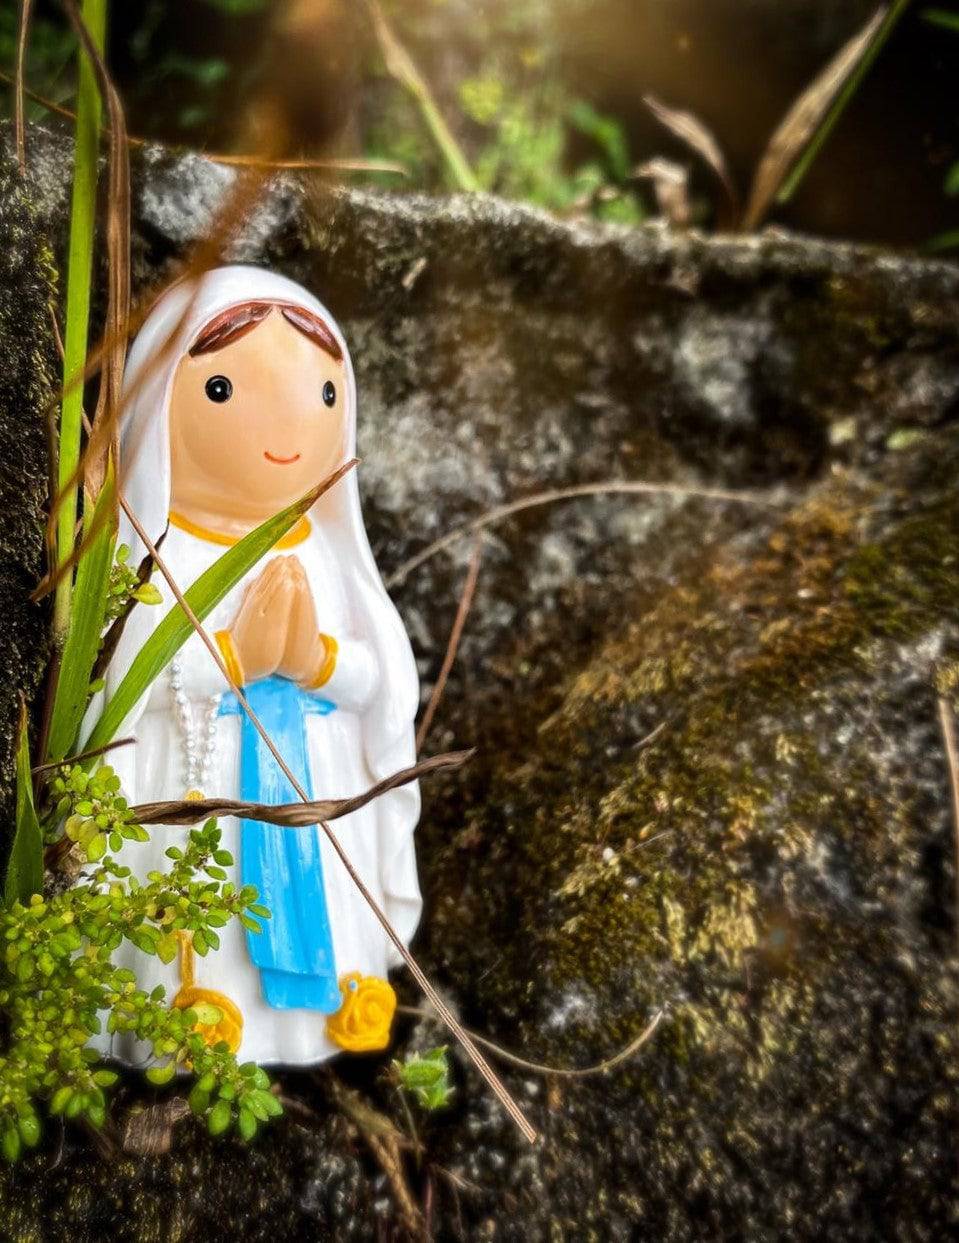 Lady of Lourdes Collectors Edition - Little Drops of Water